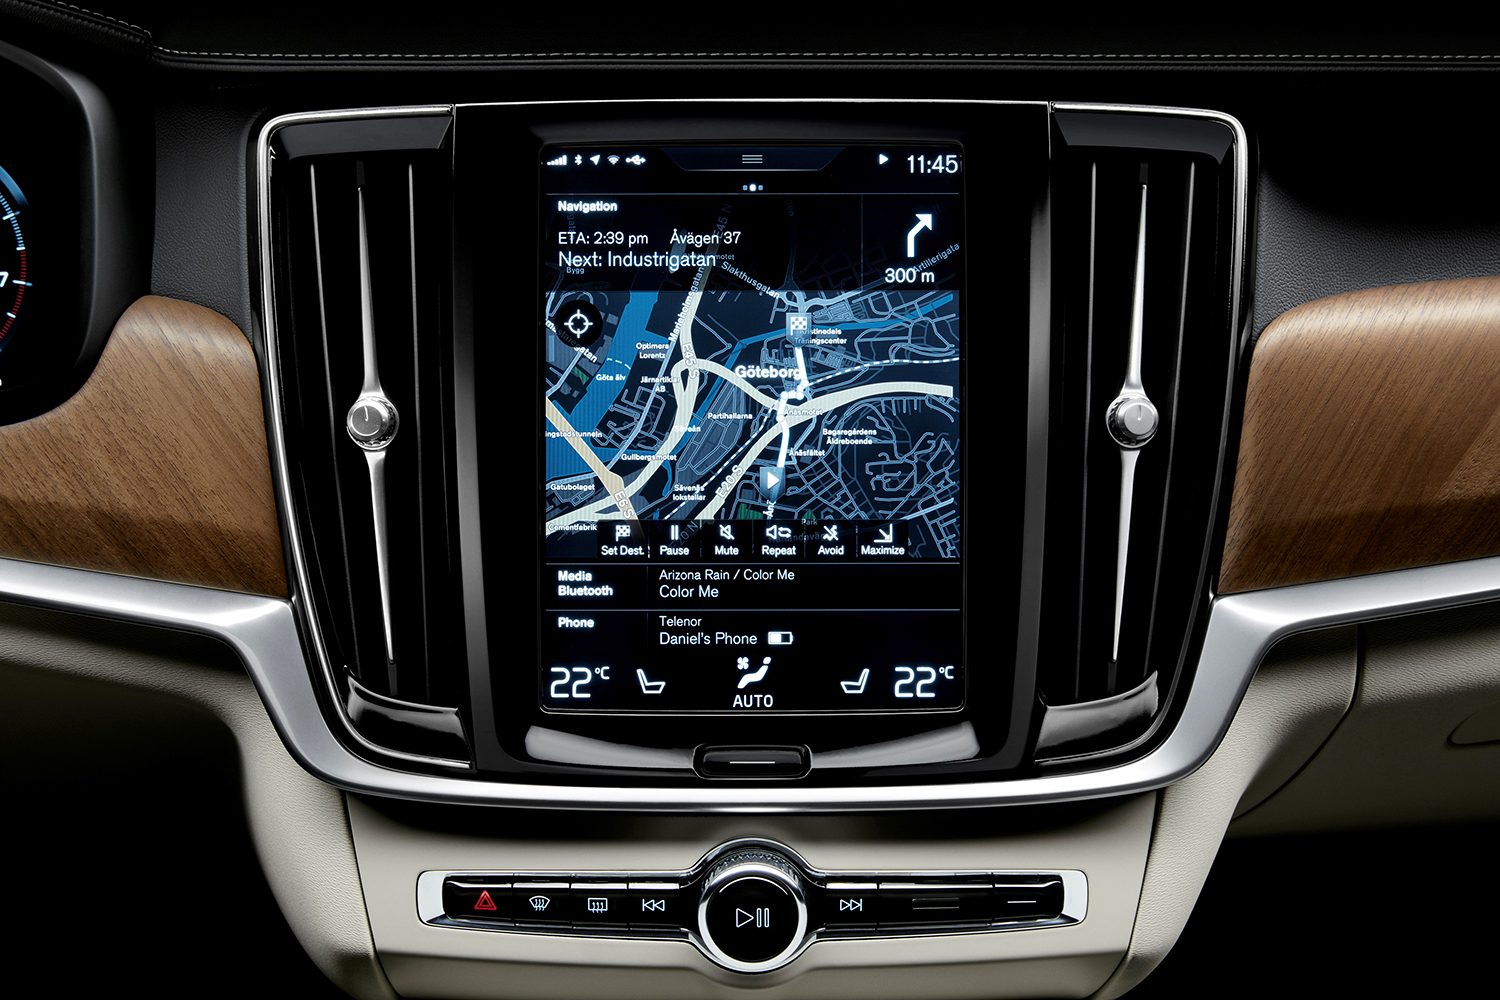 dt cars top stories of 2015 170102 interior centre display and air blades volvo s90